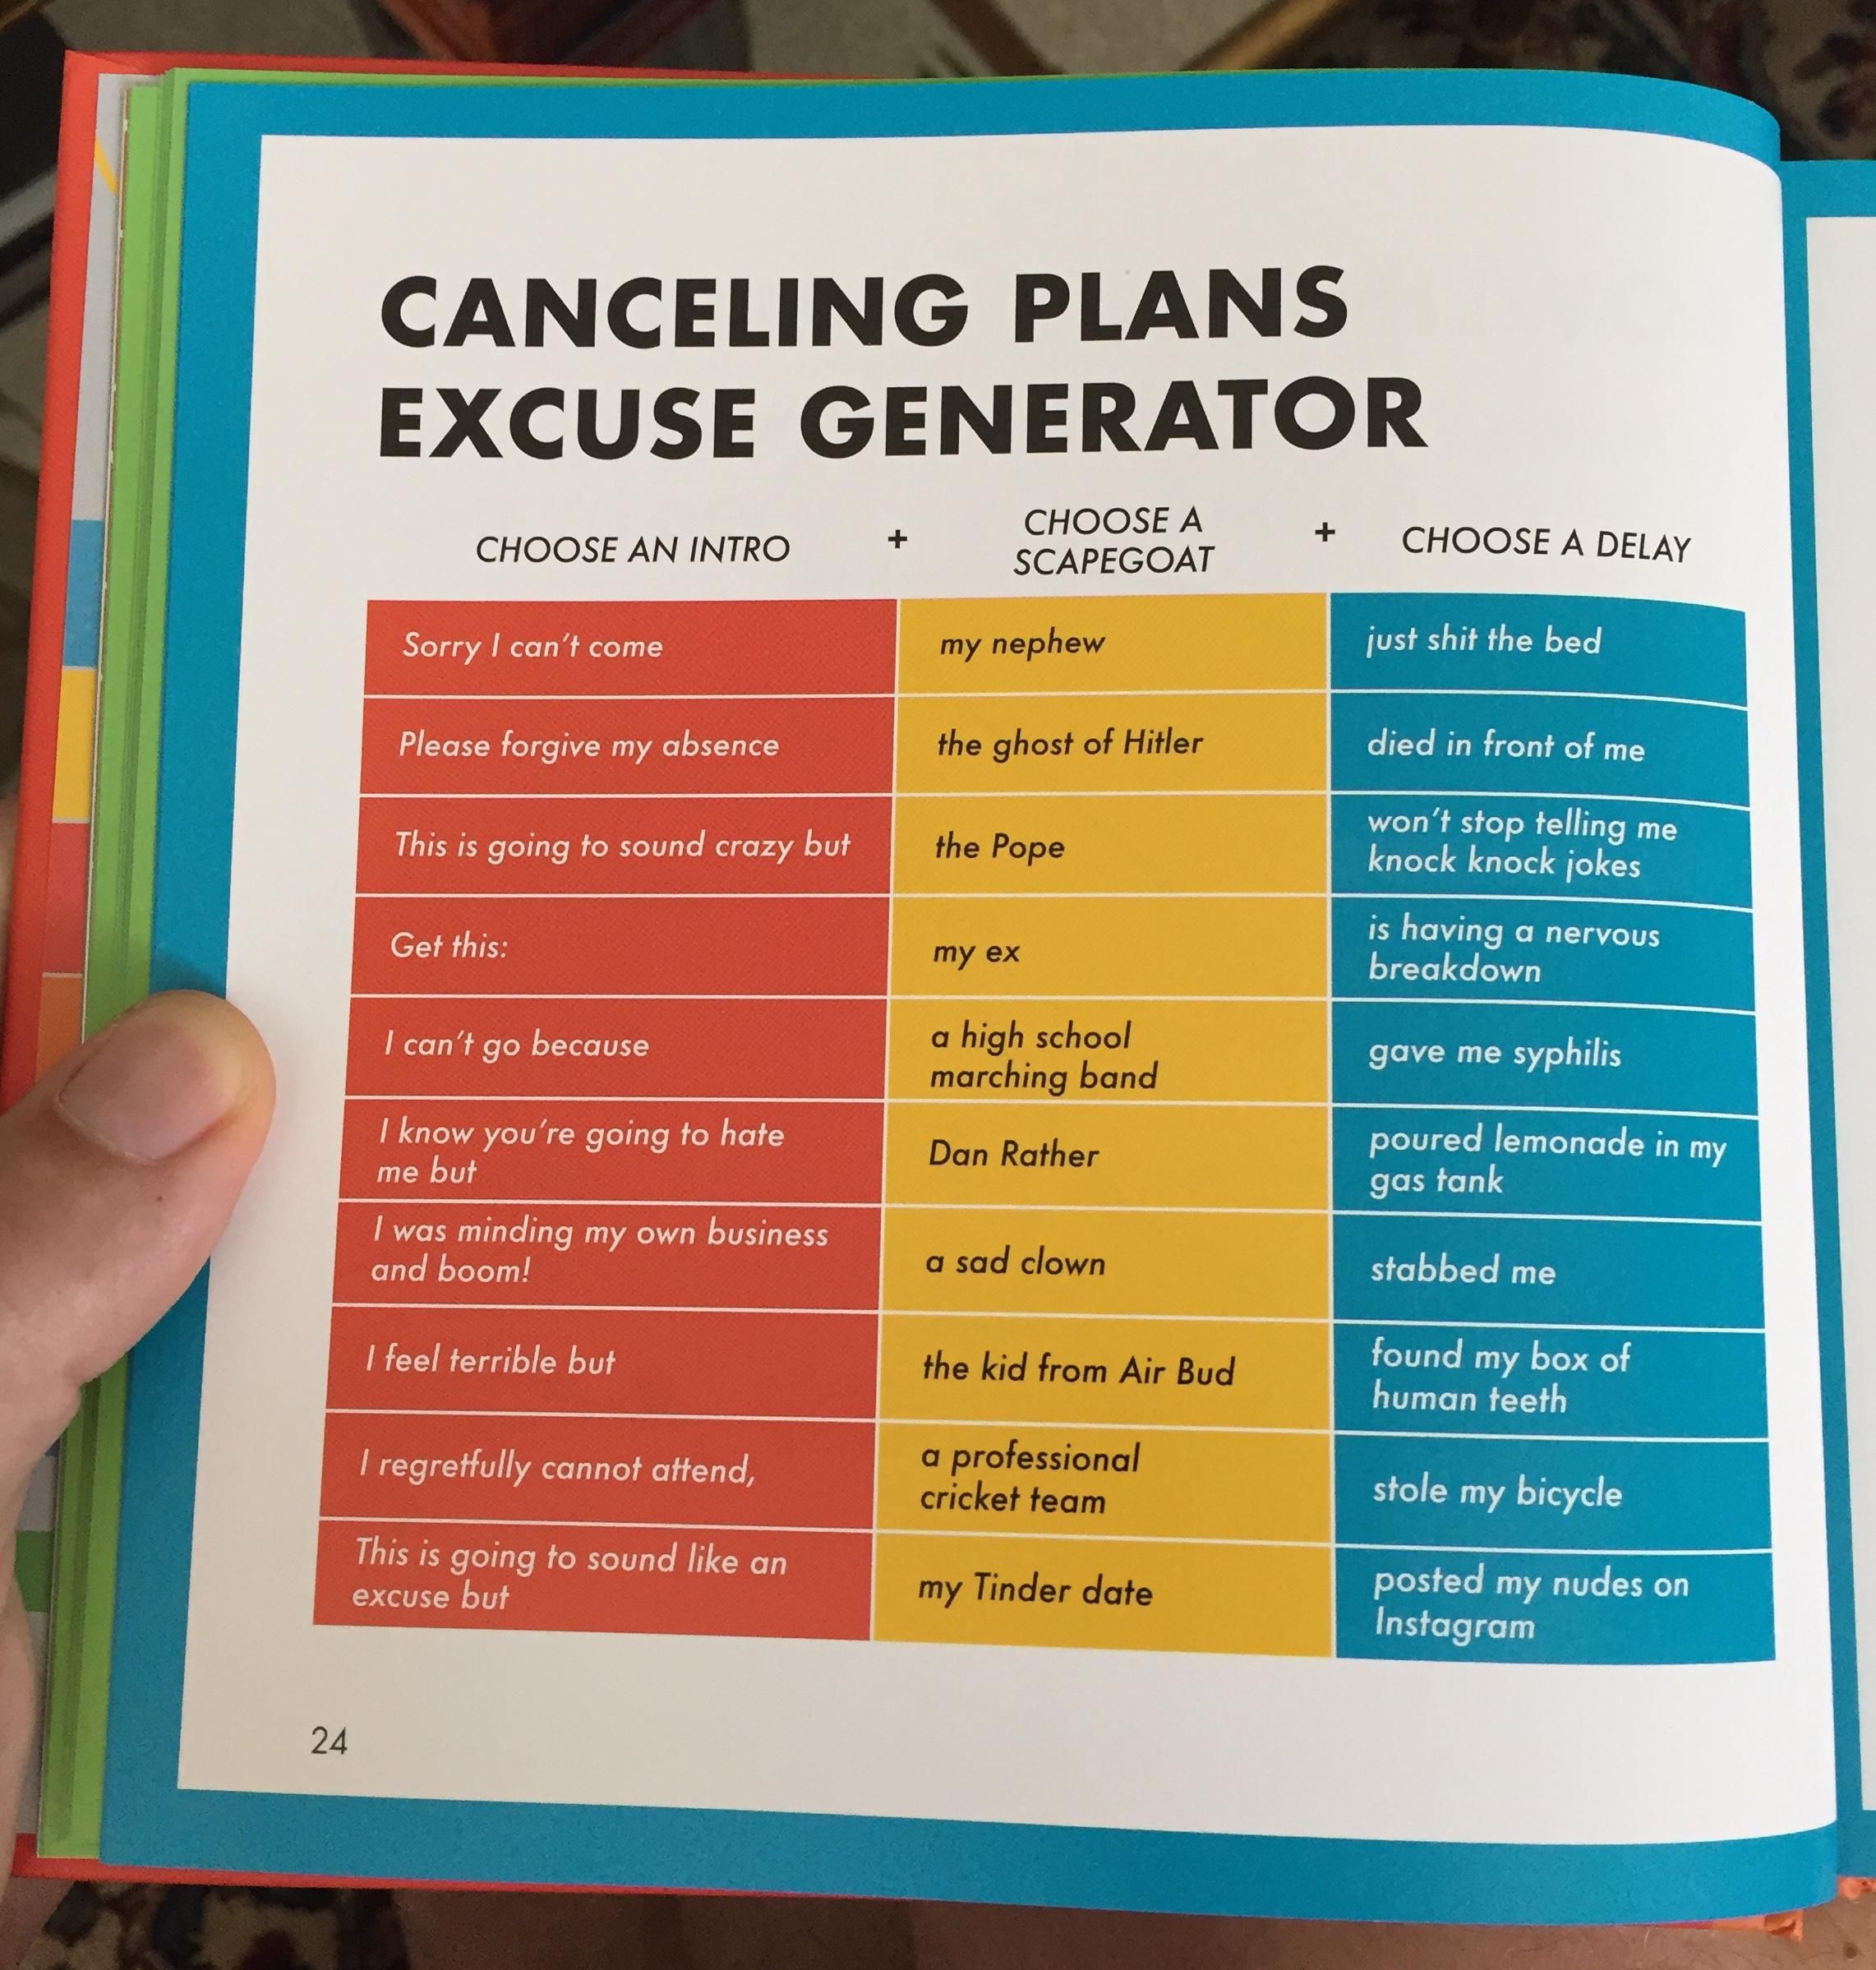 Canceling plans excuse generator